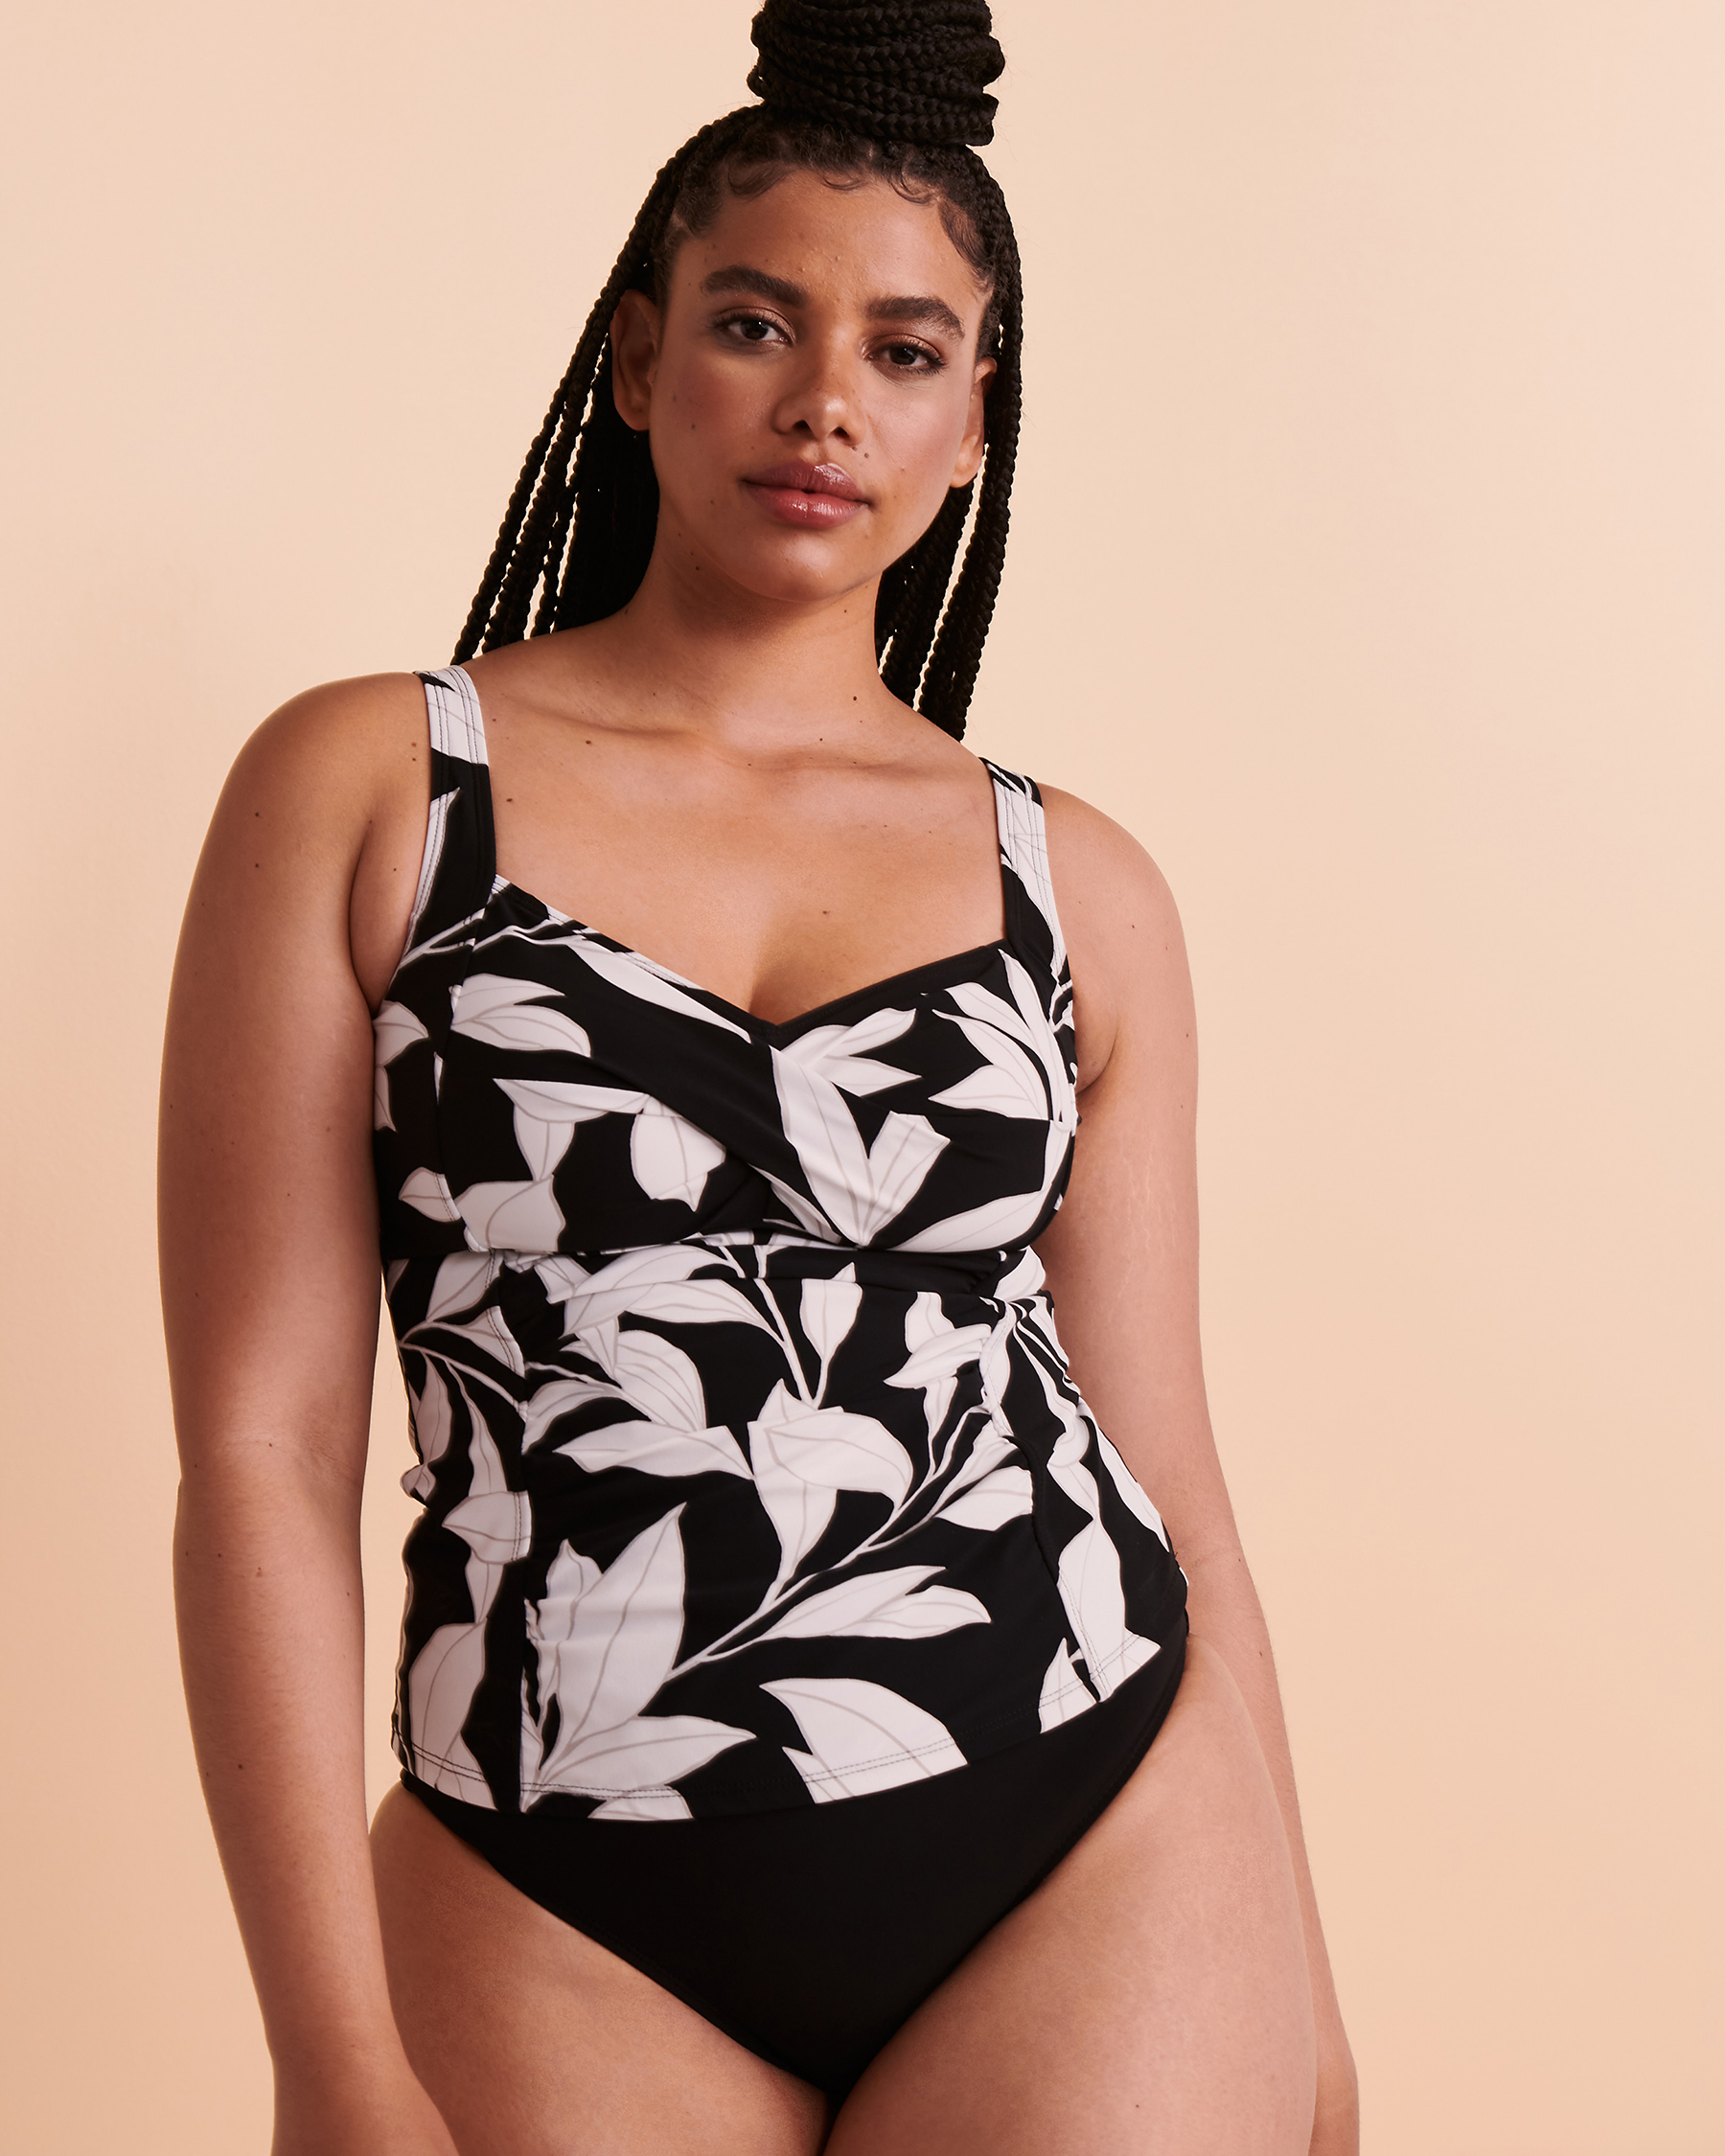 CHRISTINA ATRIUM IVY D Cup Twisted Tankini Top Black and white print 30AT5083 - View1